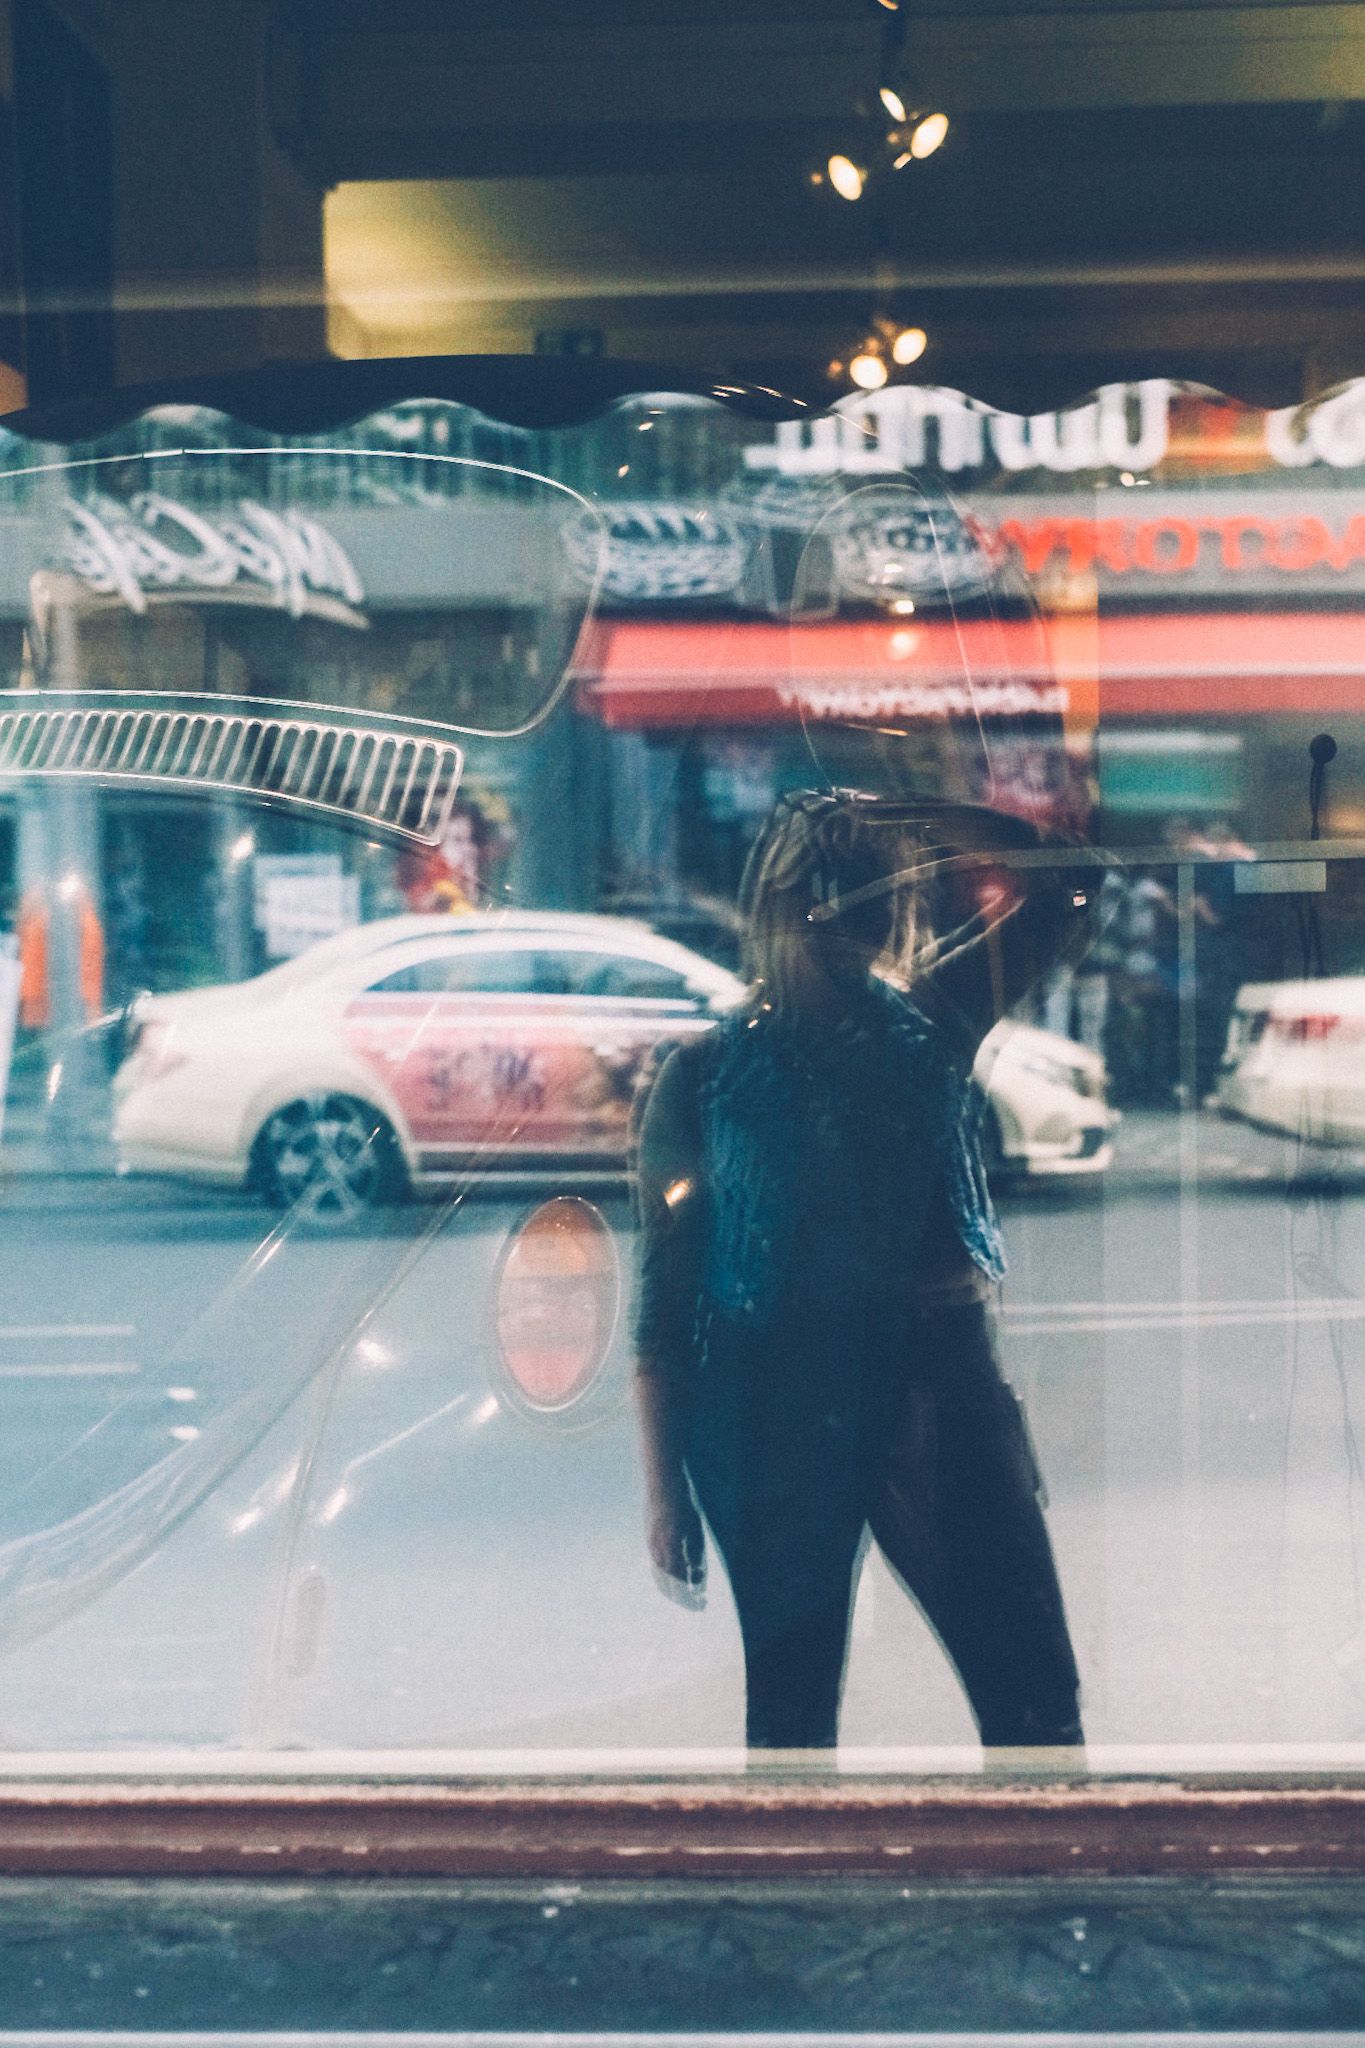 A self-portrait taken in a shop window on the street in Berlin, cars and storefronts in the background.